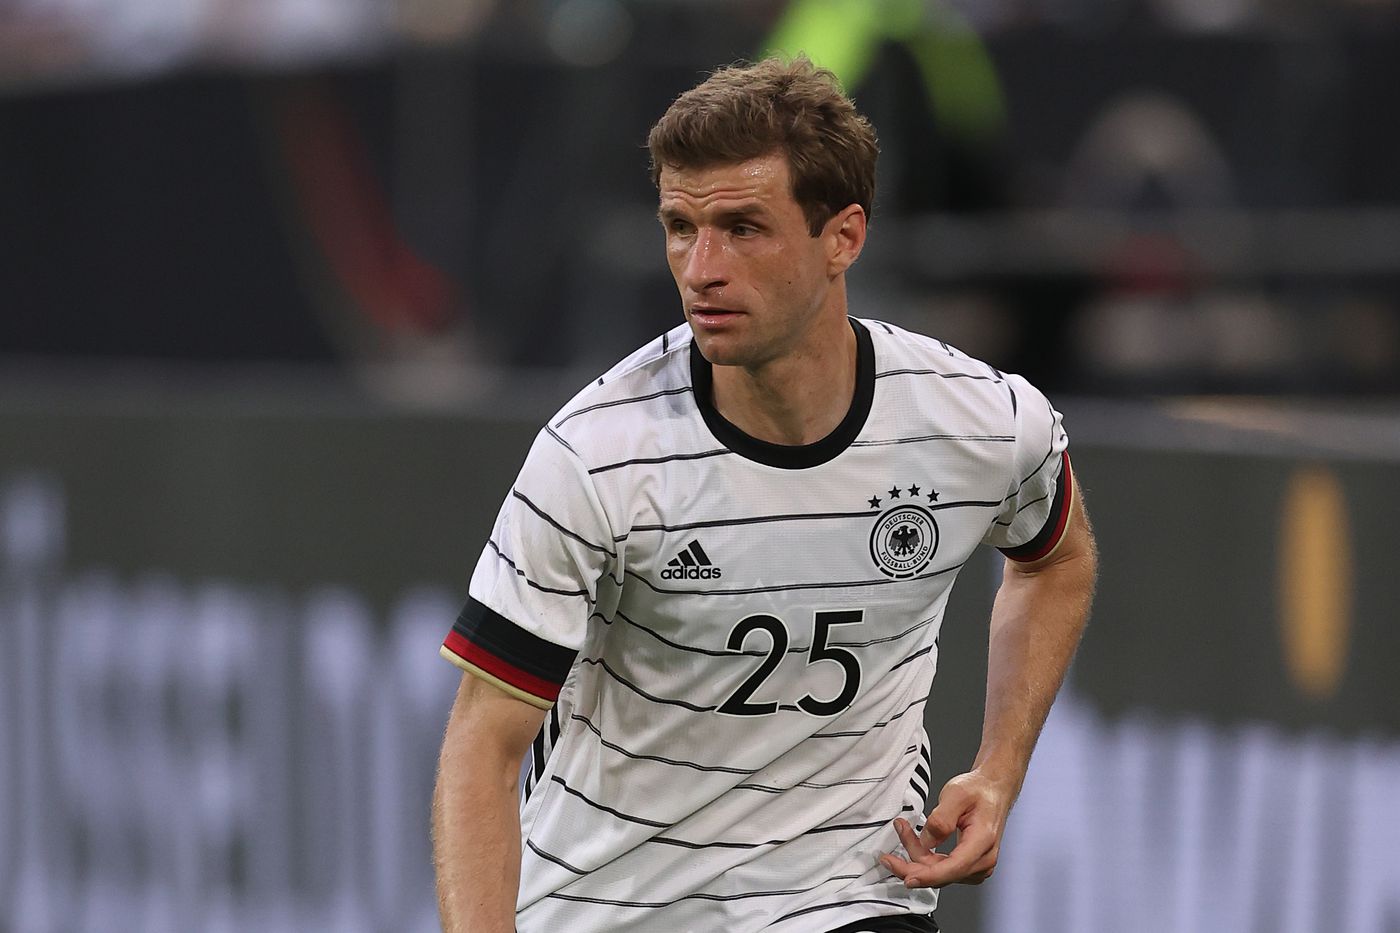 UEFA Nations League 2022/23: Thomas Muller's Germany eager to make FRESH Start against Italy, Follow Italy vs Germany LIVE Streaming: Check Team News, Predictions